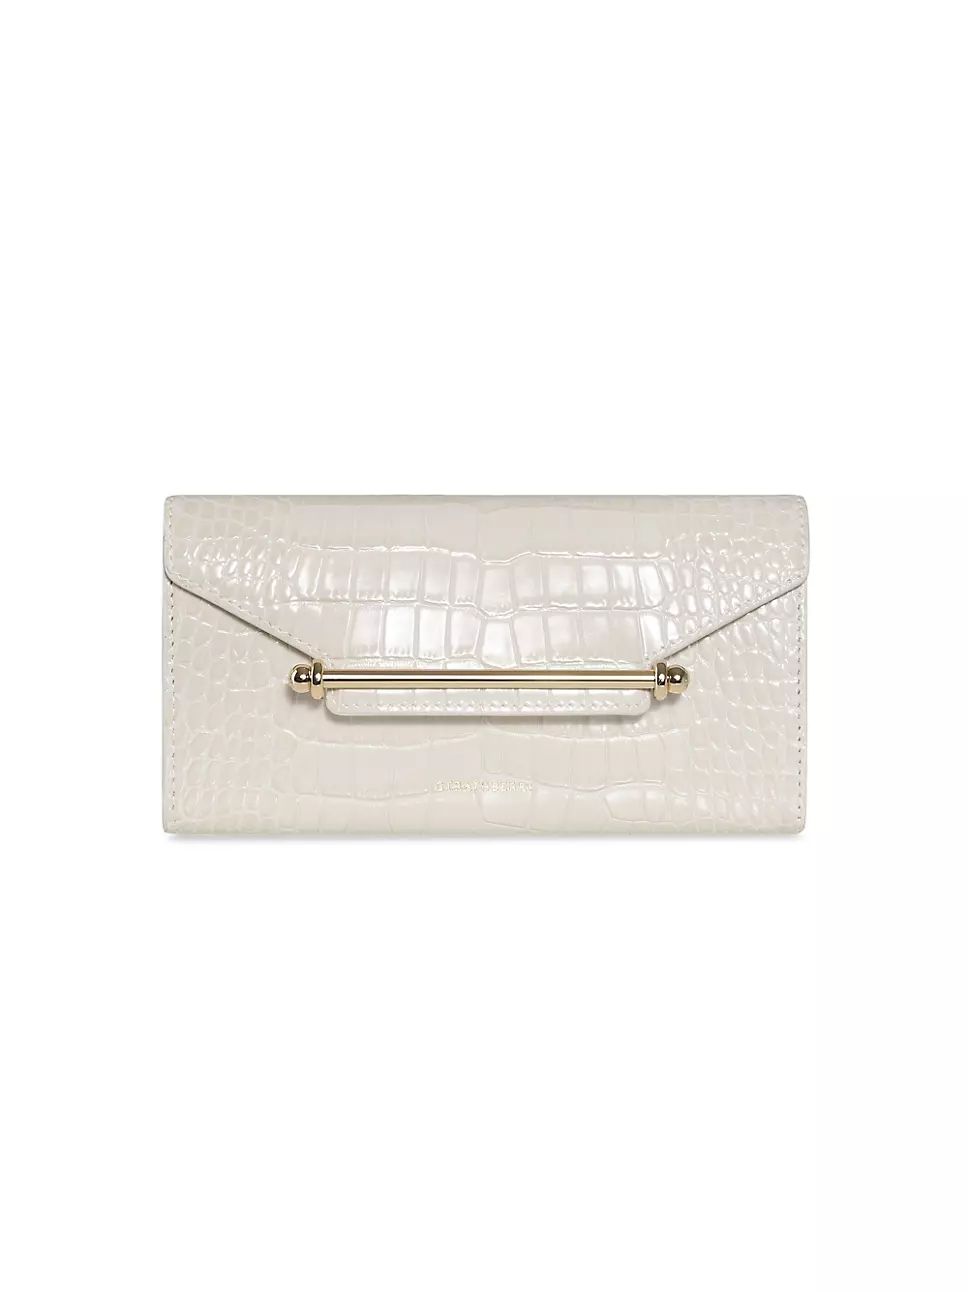 Multrees Croc-Embossed Leather Wallet-On-Chain | Saks Fifth Avenue